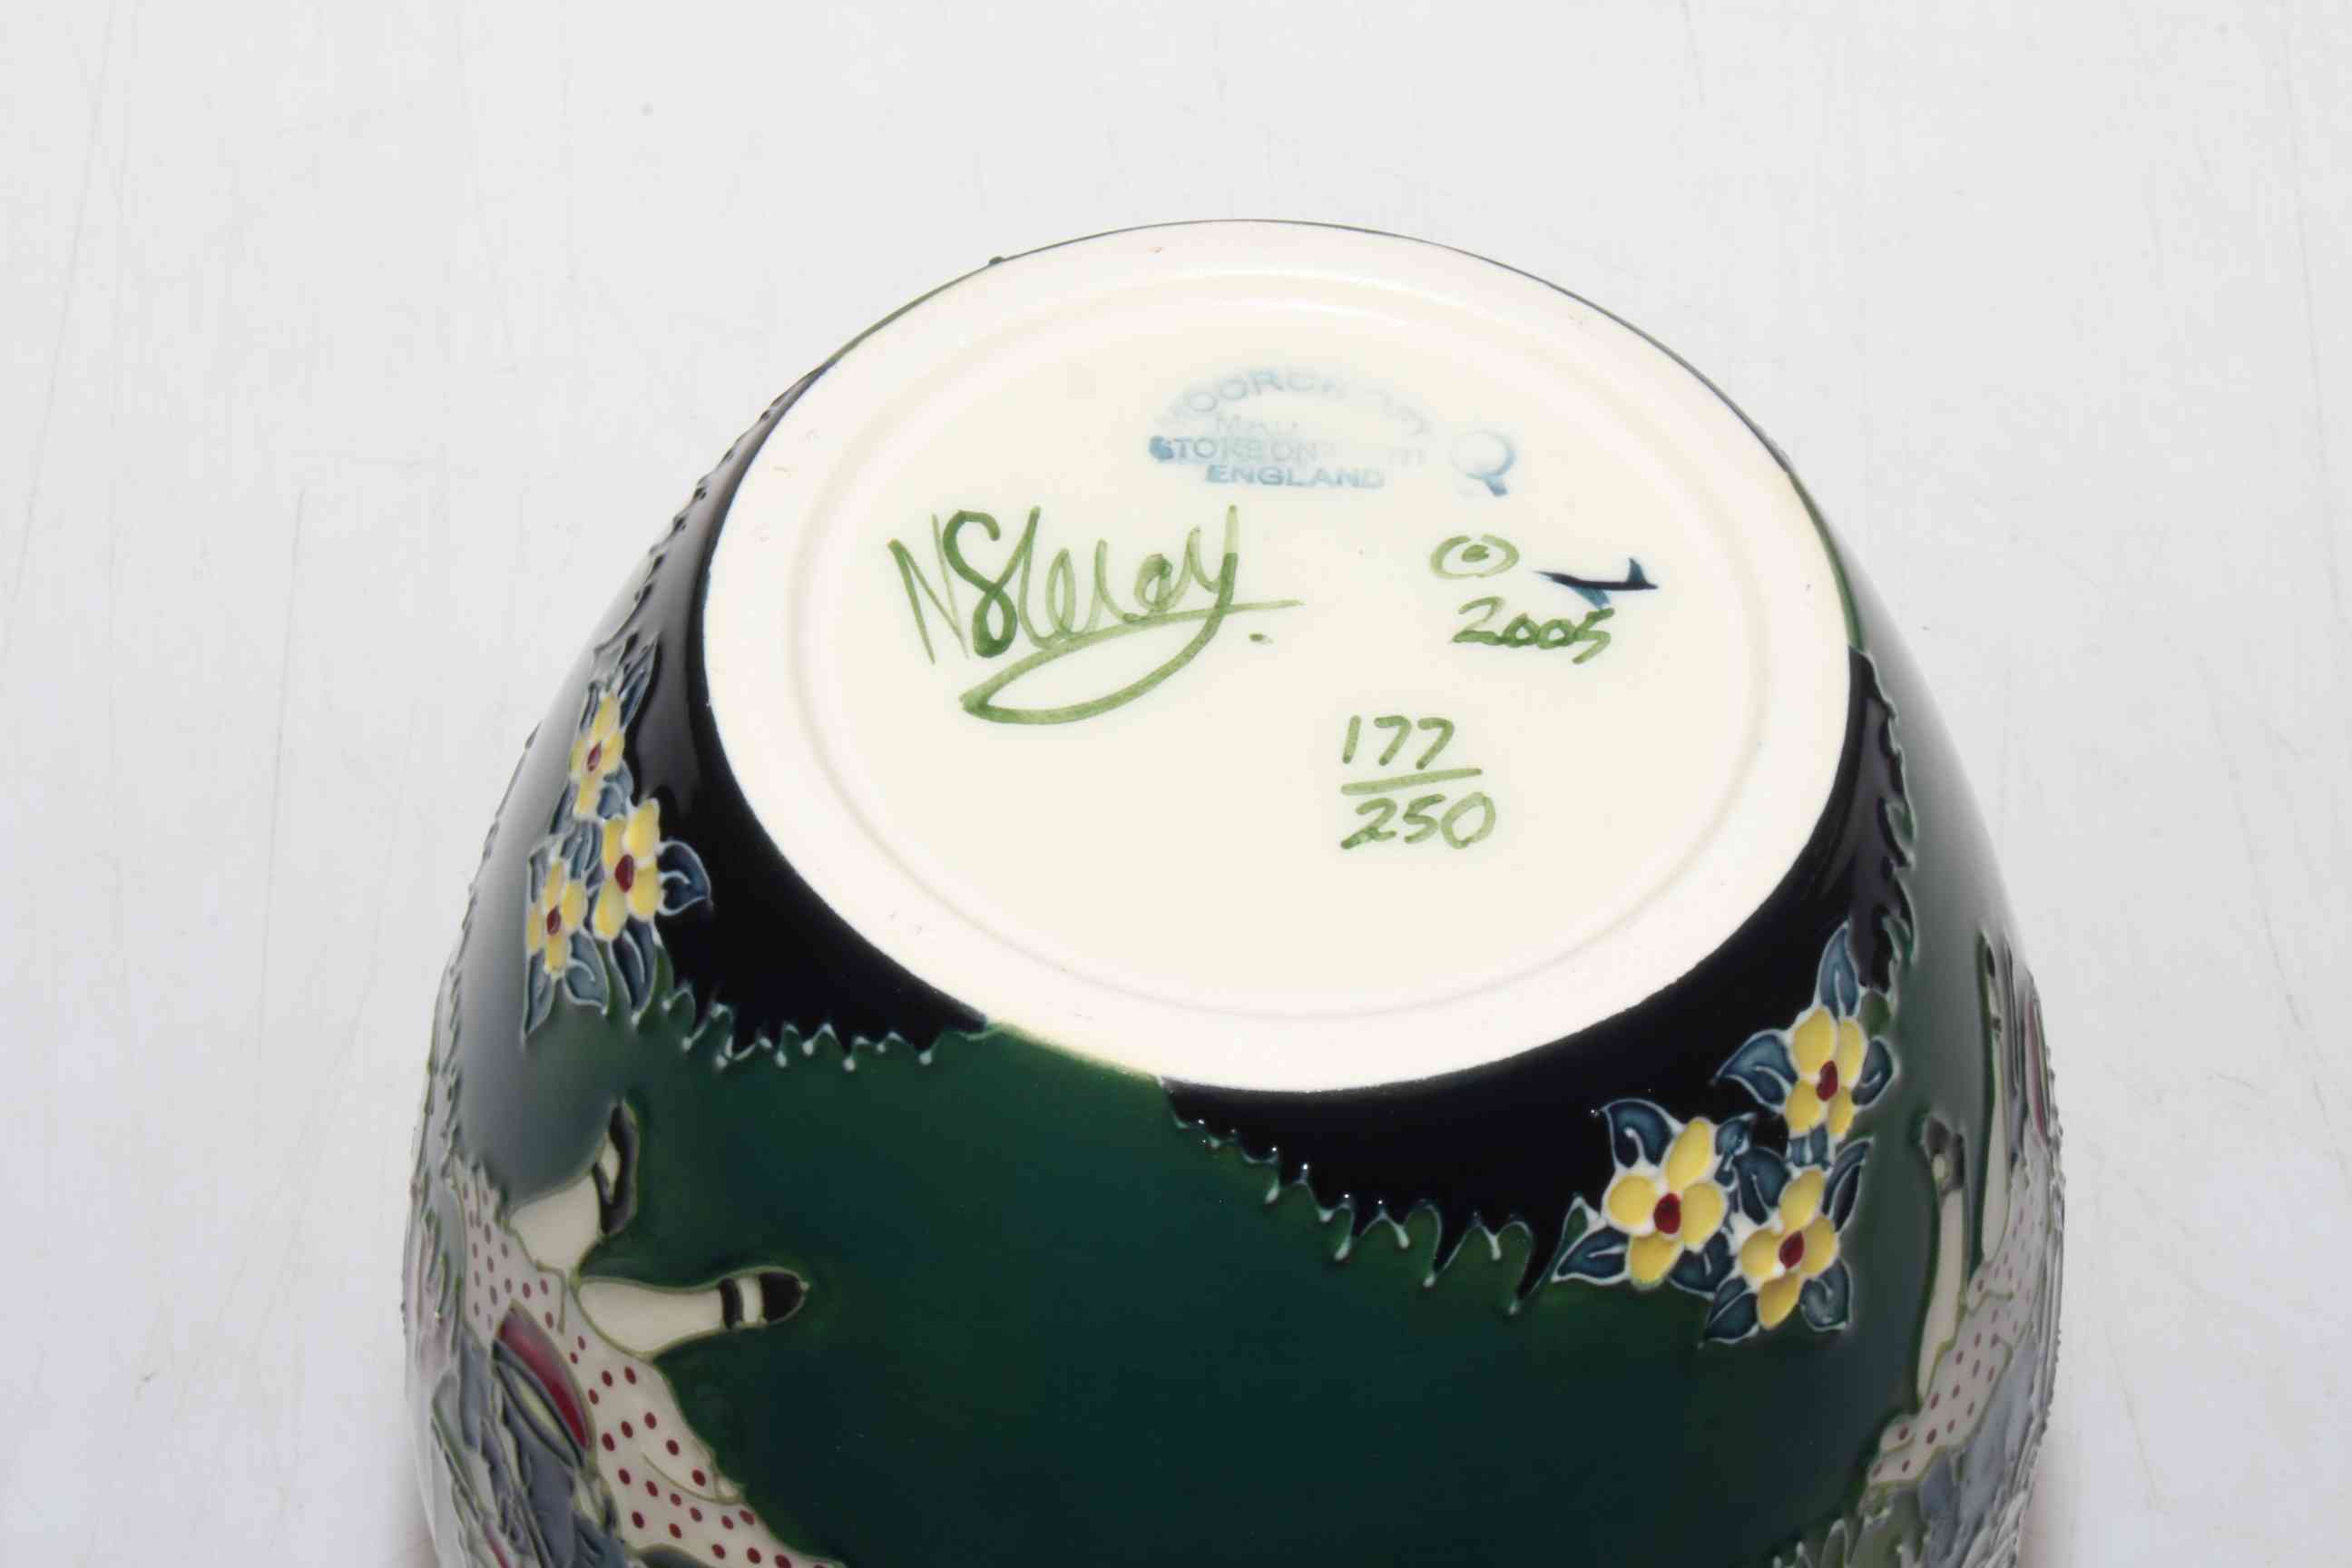 Moorcroft limited edition Little Miss Muffet ginger jar by Nichola Slaney, 177/250, 15cm, with box. - Image 3 of 3